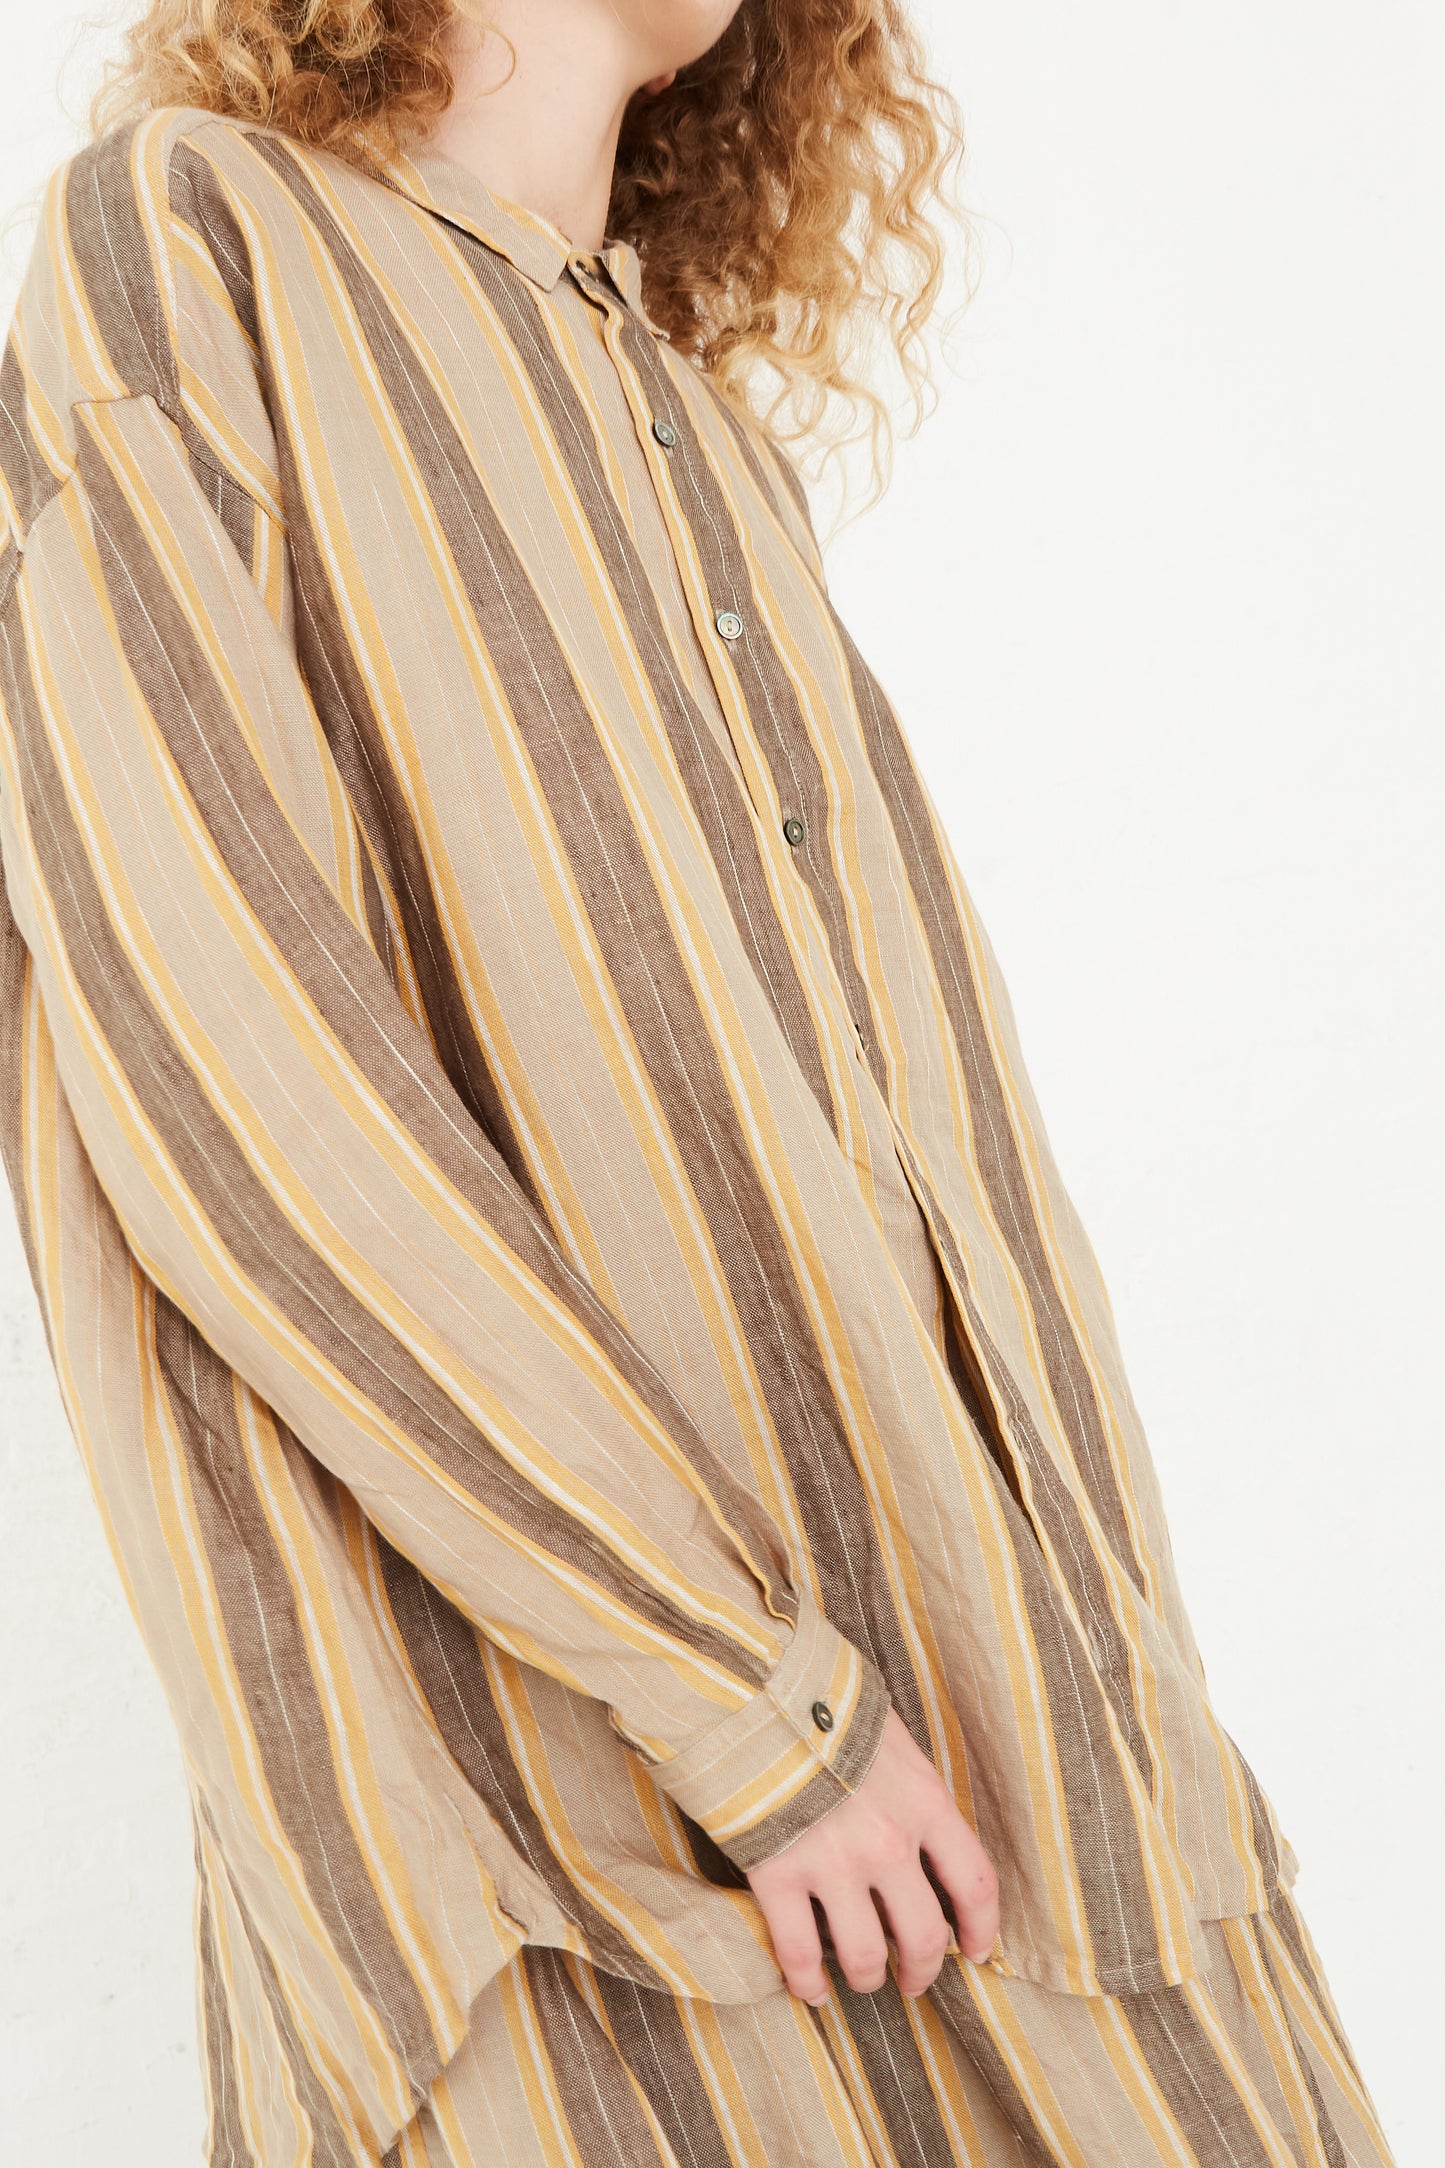 A model wearing a Linen Stripe Shirt in Mustard from Ichi Antiquités with curly hair.